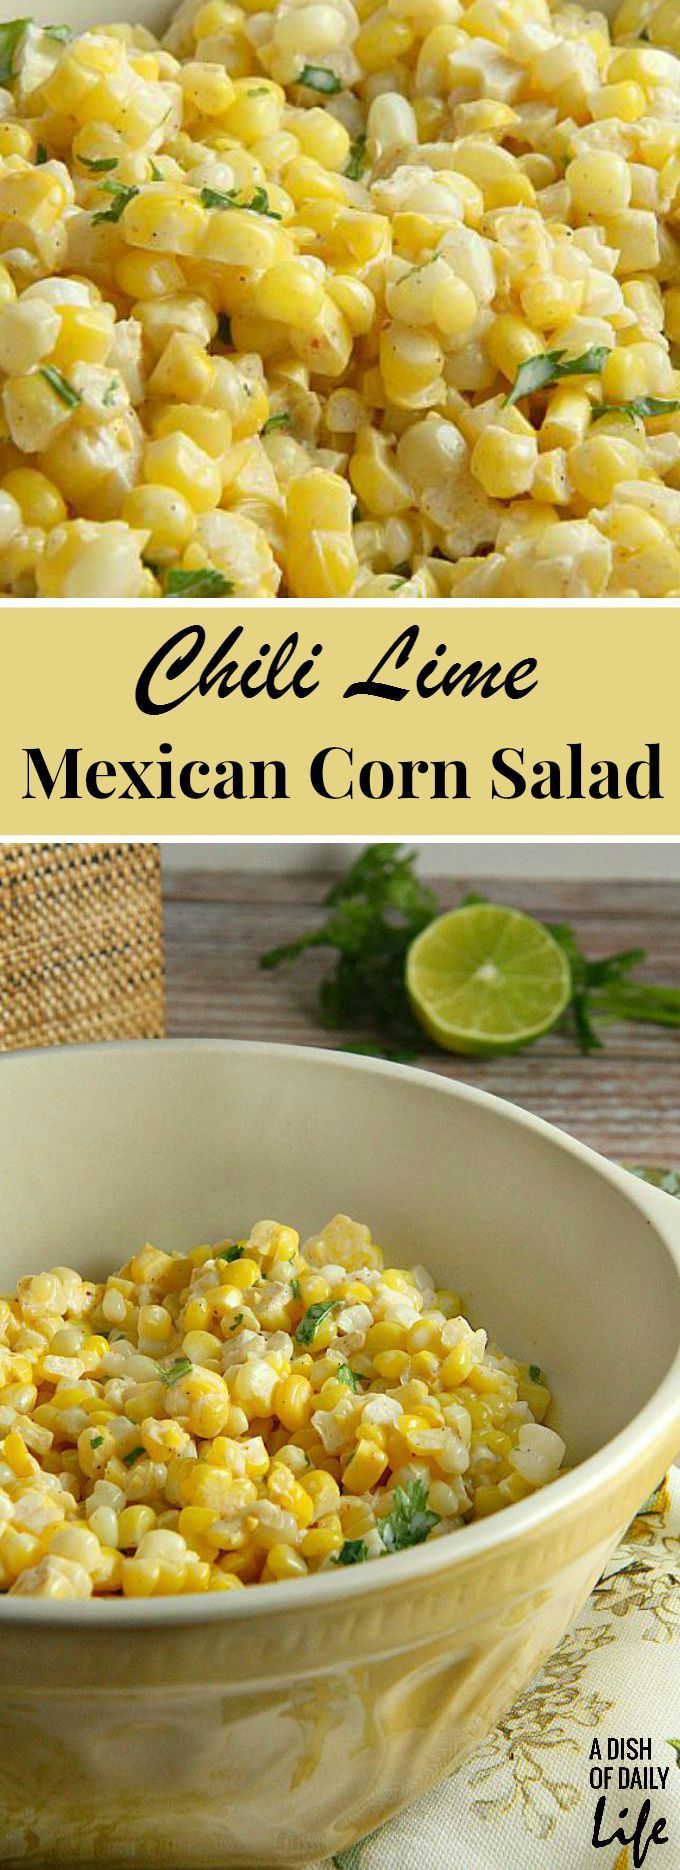 Like Mexican street corn? Turn it into a salad! This easy and delicious 15 minute Chili Lime Mexican C